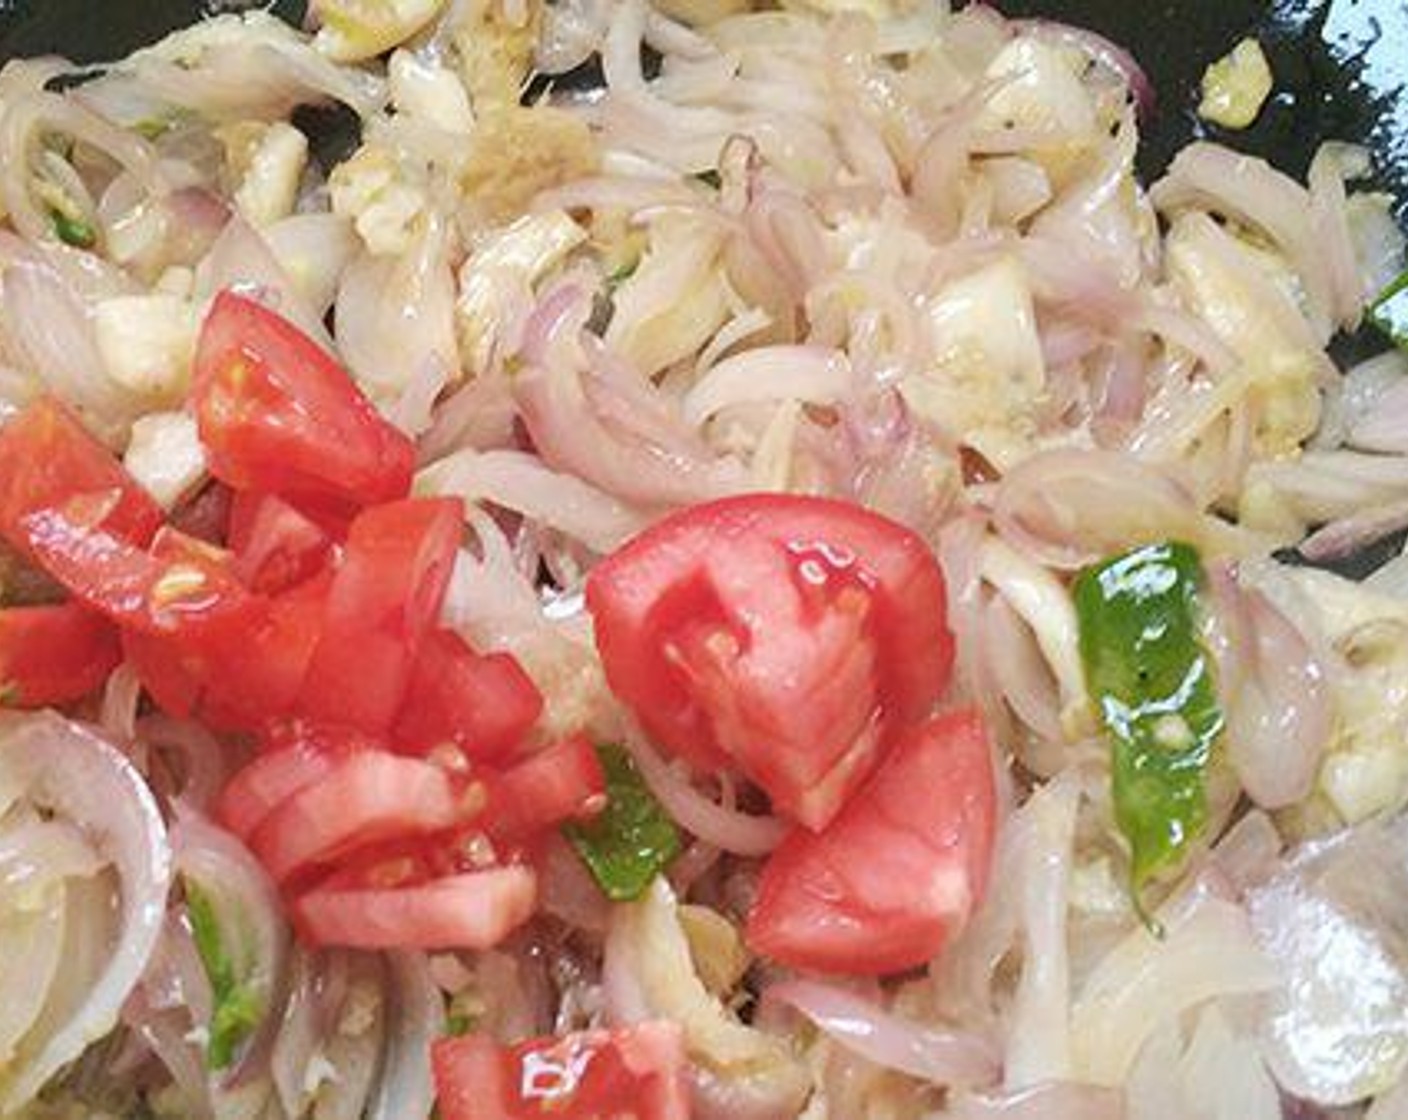 step 2 To a pan add Oil (3 Tbsp), Onions (3) and sautee till it becomes soft. Add Fresh Ginger (1 Tbsp), Garlic (1 Tbsp), and Green Chili Peppers (4). Sautee till the raw smell goes away. Add Tomato (1) and cook well.